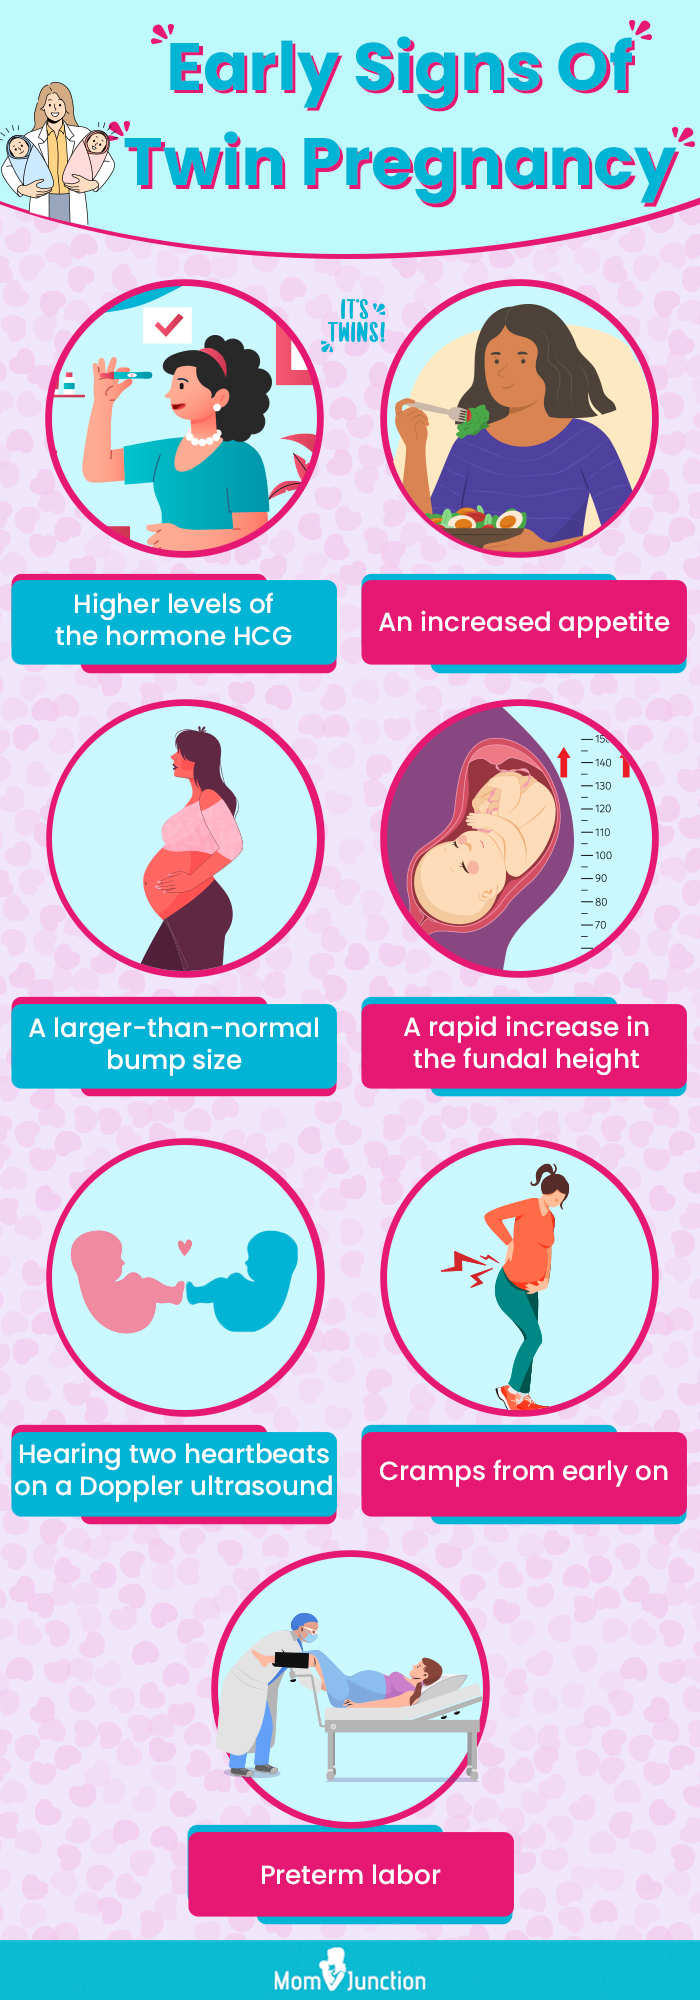 early signs of twin pregnancy (infographic)